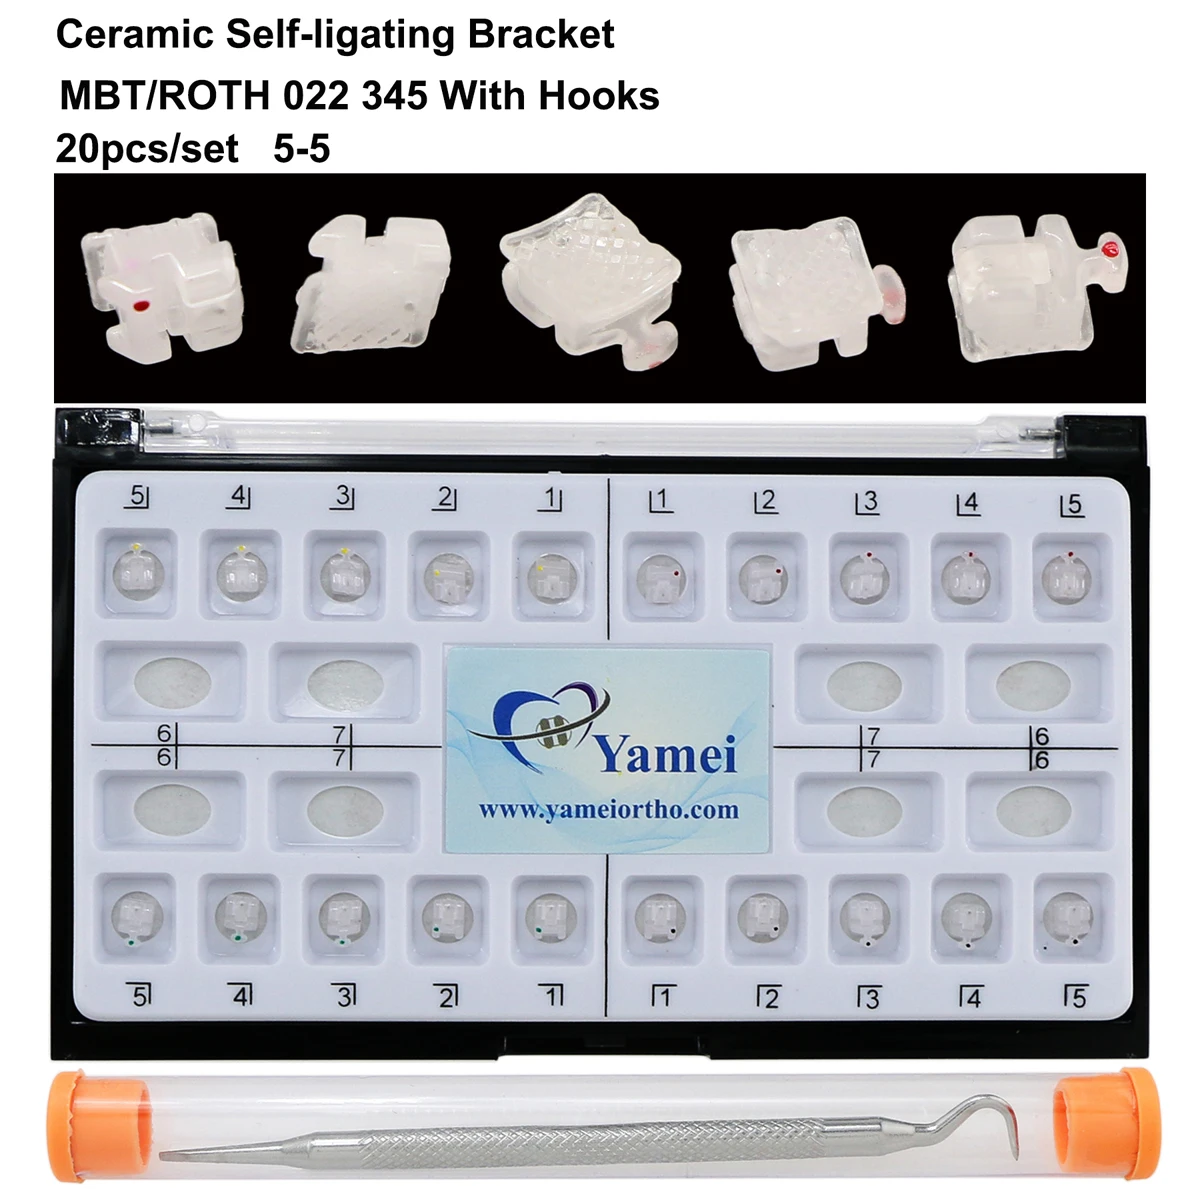 YAMEI Dental Orthodontic Clear Style Self-Ligating Ceramic Brackets Braces Roth/MBT 022 Slot 345 With Hooks